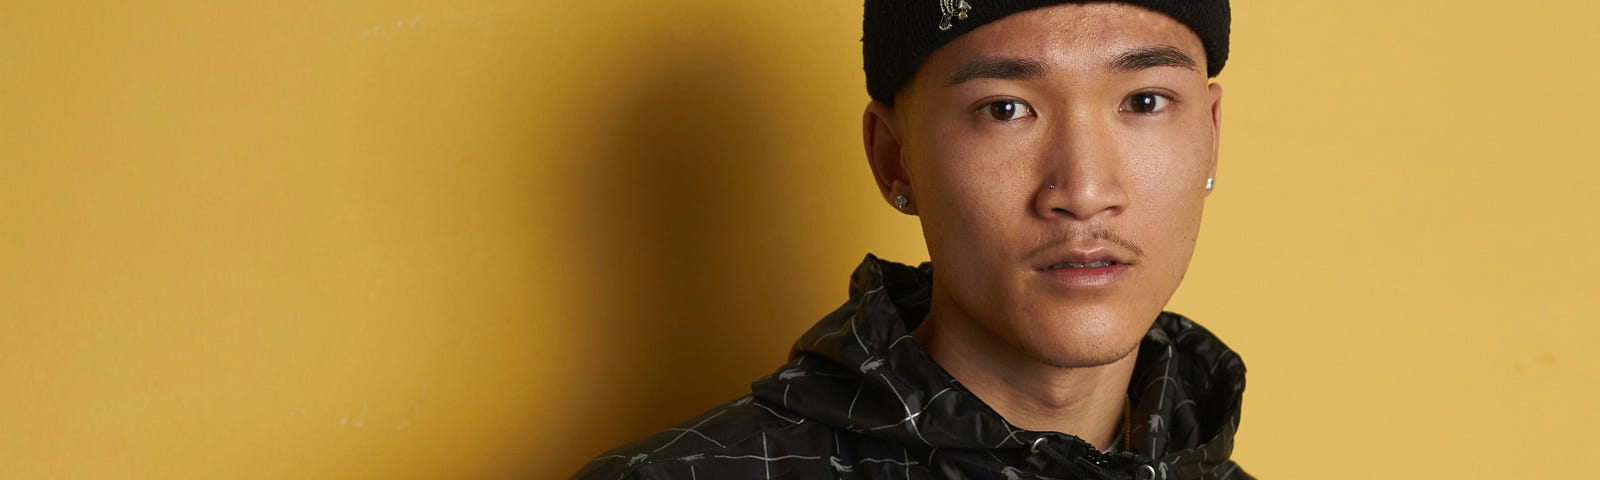 An Asian young man wearing all black is propped against a yellow wall.